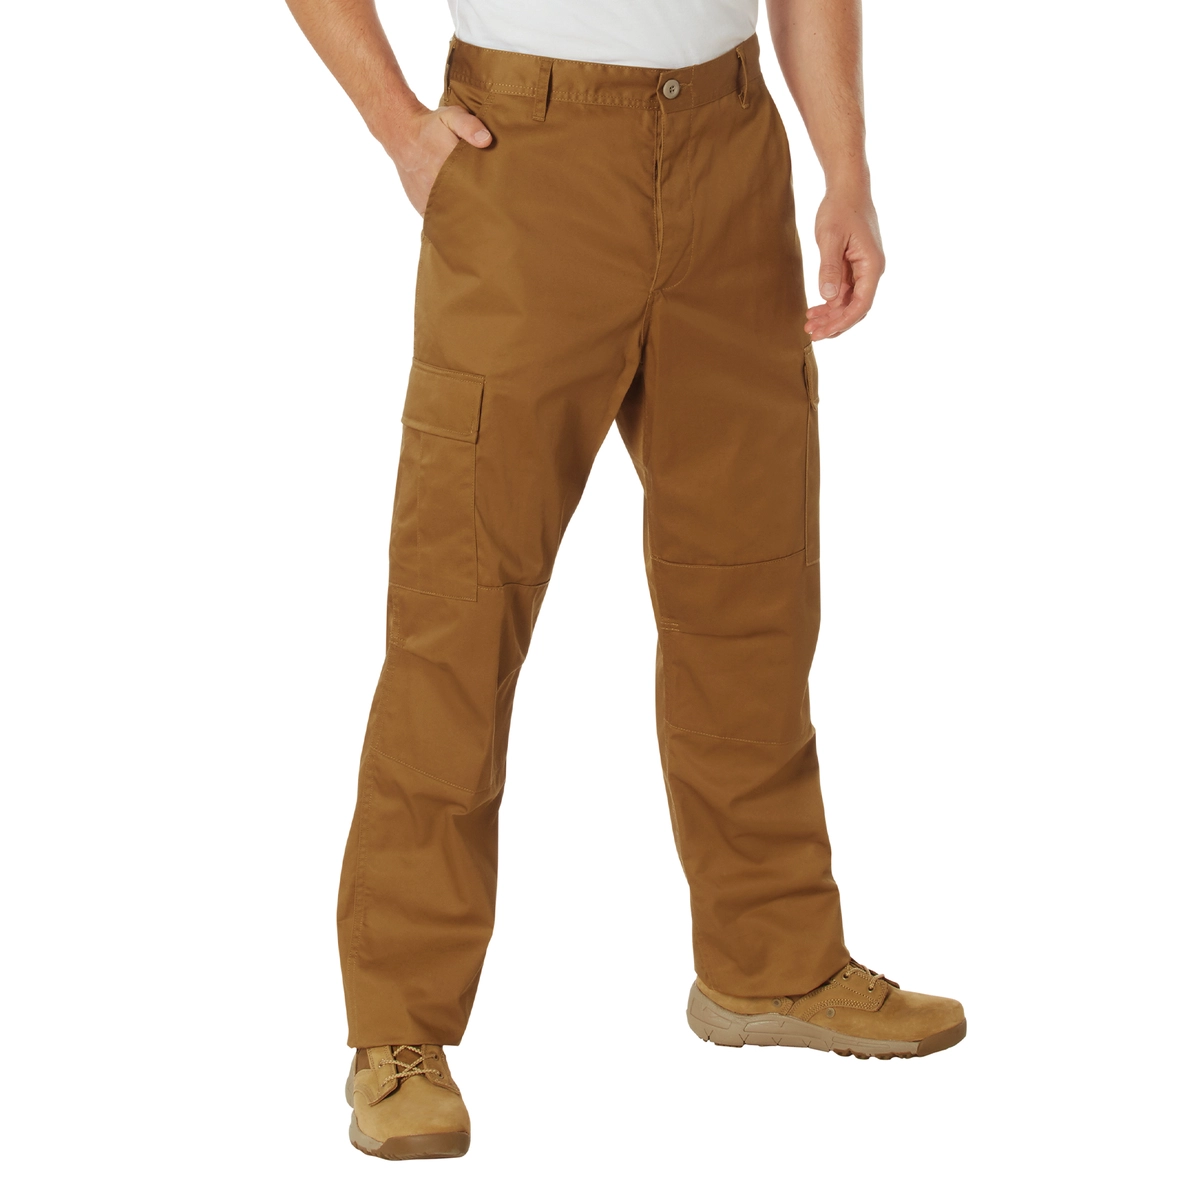 New work brown color cargo pants